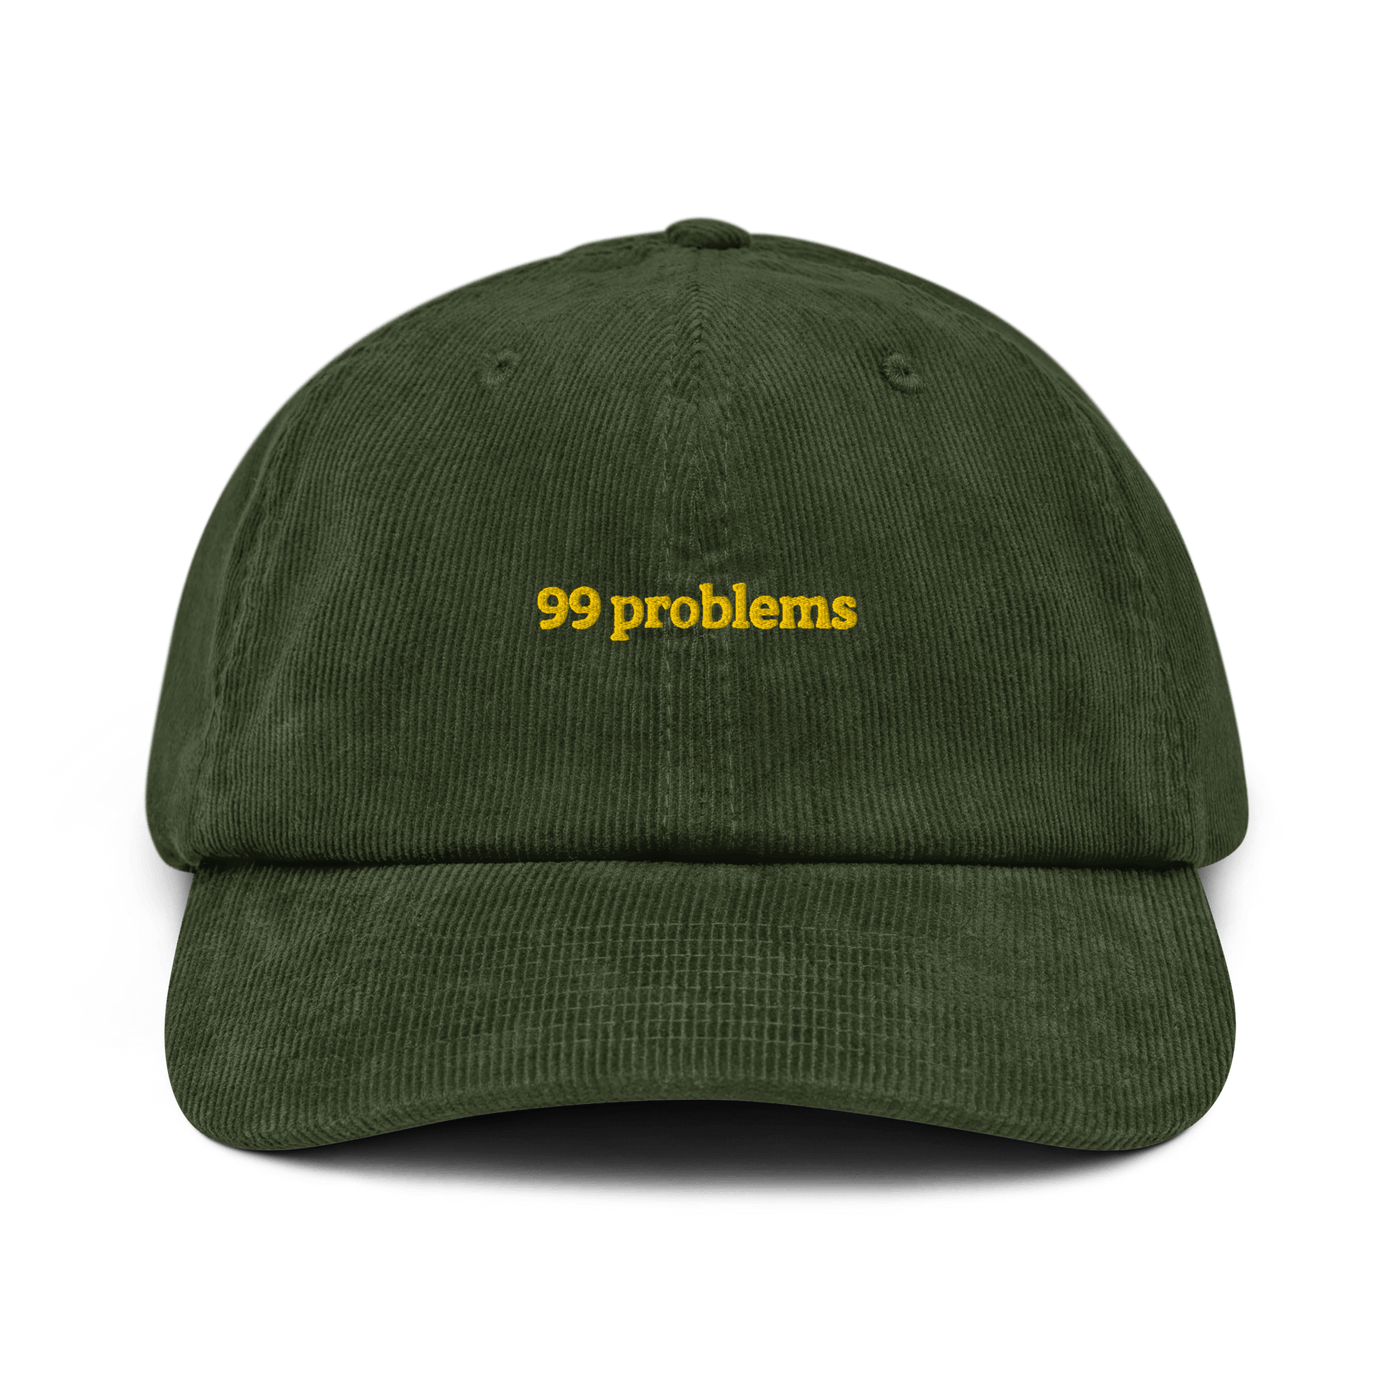 99 problems Corduroy hat - Dark Olive - - Just Another Cap Store